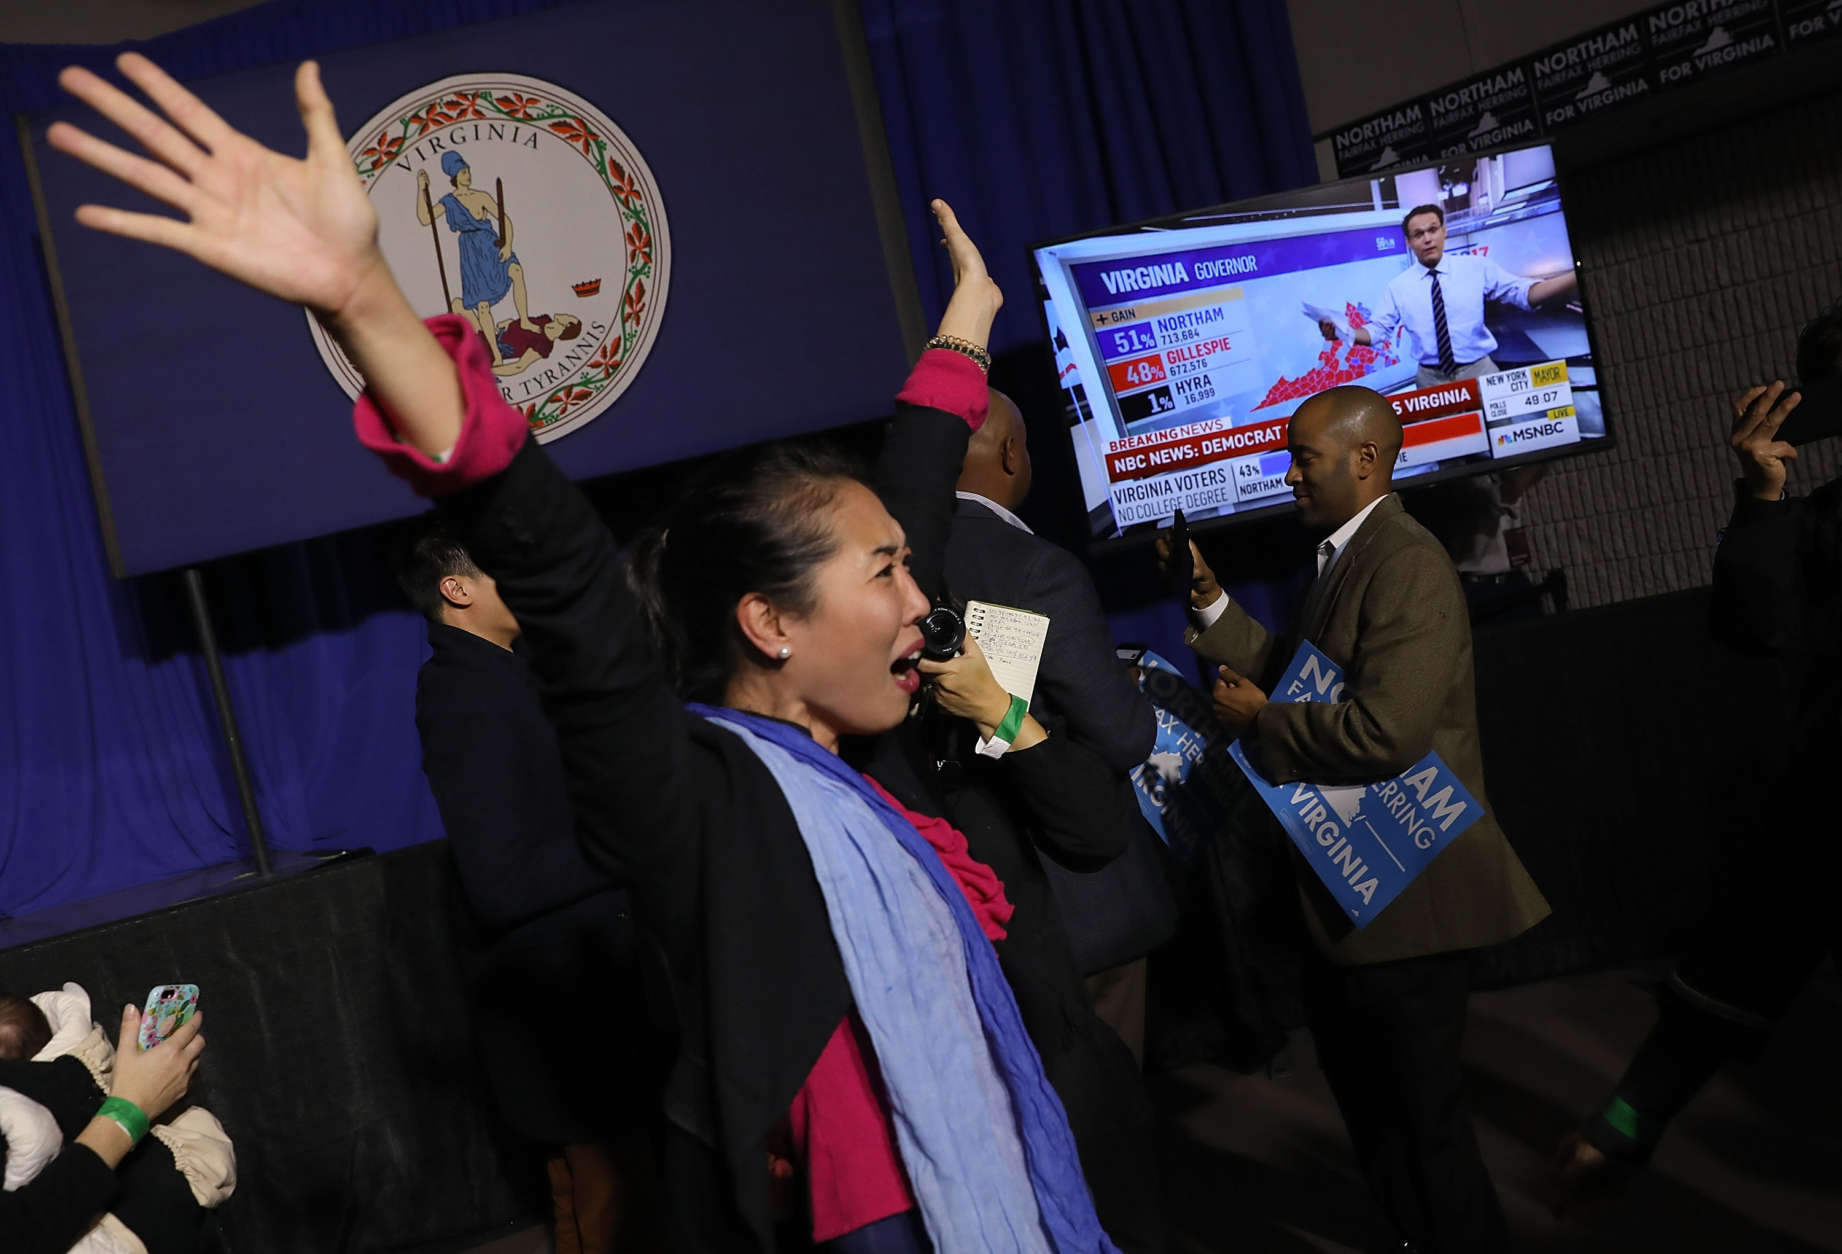 FAIRFAX, VA - NOVEMBER 07:  Hyun Lee, a supporter of Ralph Northam, the Democratic candidate for governor of Virginia, celebrates as early projections indicated a Northam victory at an election night rally November 7, 2017 in Fairfax, Virginia. Northam has fought a close race with Republican candidate Ed Gillespie.
 (Photo by Win McNamee/Getty Images)